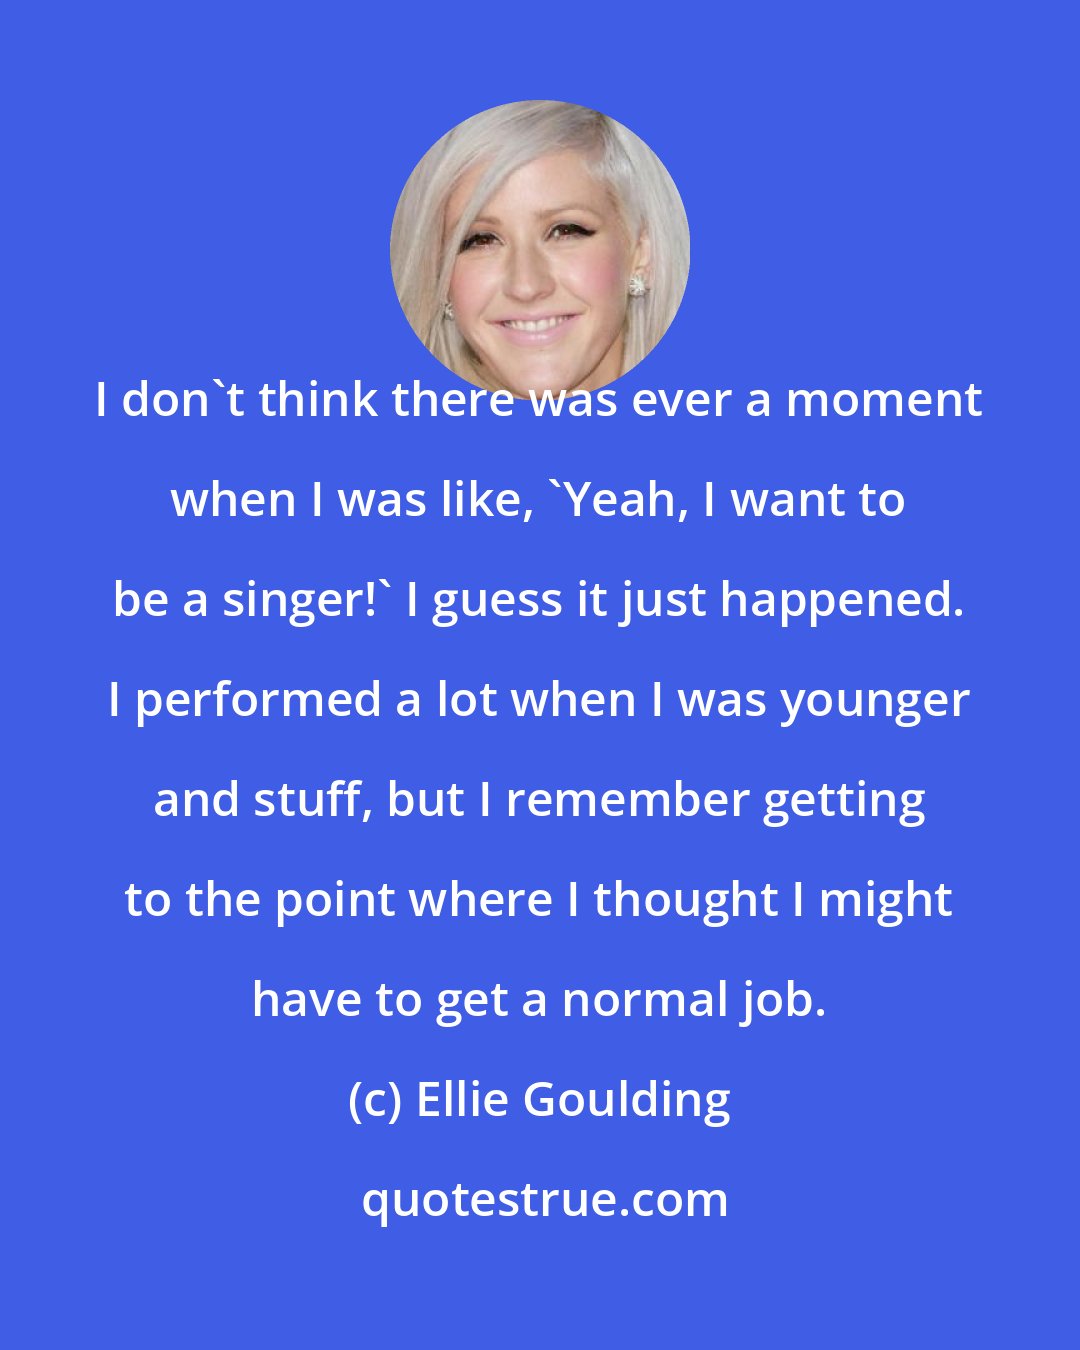 Ellie Goulding: I don't think there was ever a moment when I was like, 'Yeah, I want to be a singer!' I guess it just happened. I performed a lot when I was younger and stuff, but I remember getting to the point where I thought I might have to get a normal job.